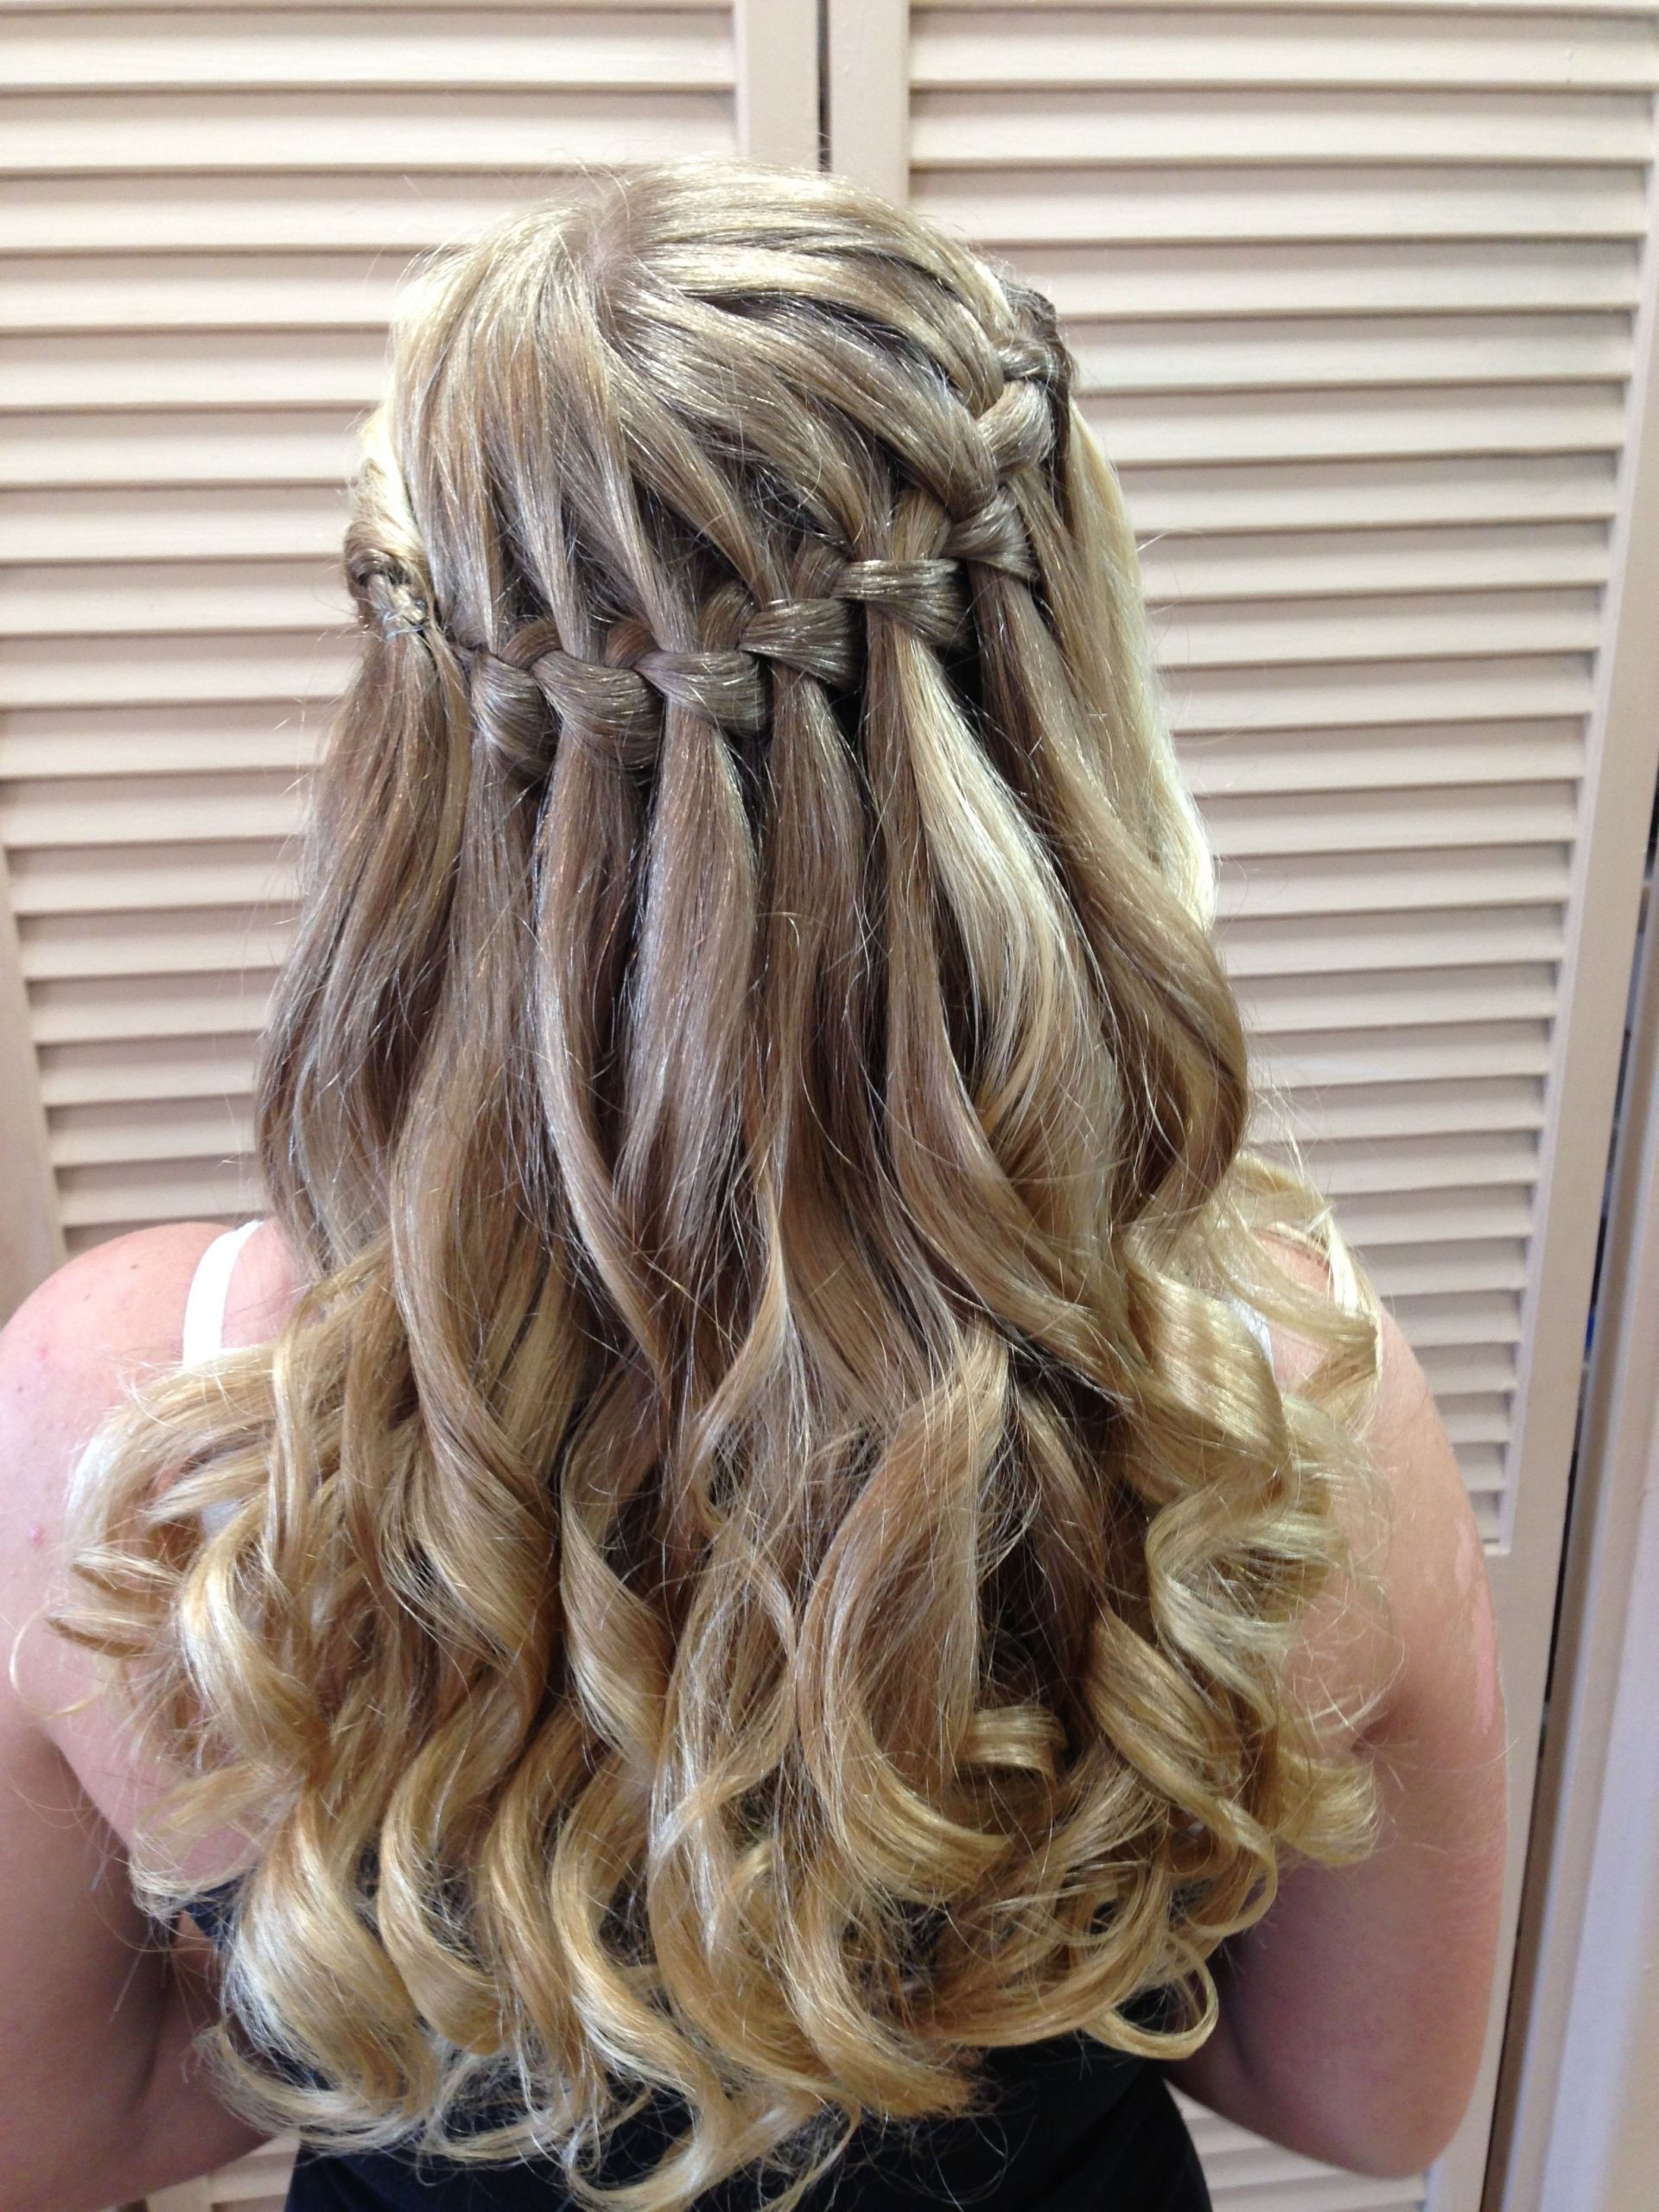 the-21-best-ideas-for-8th-grade-prom-hairstyles-home-family-style-and-art-ideas